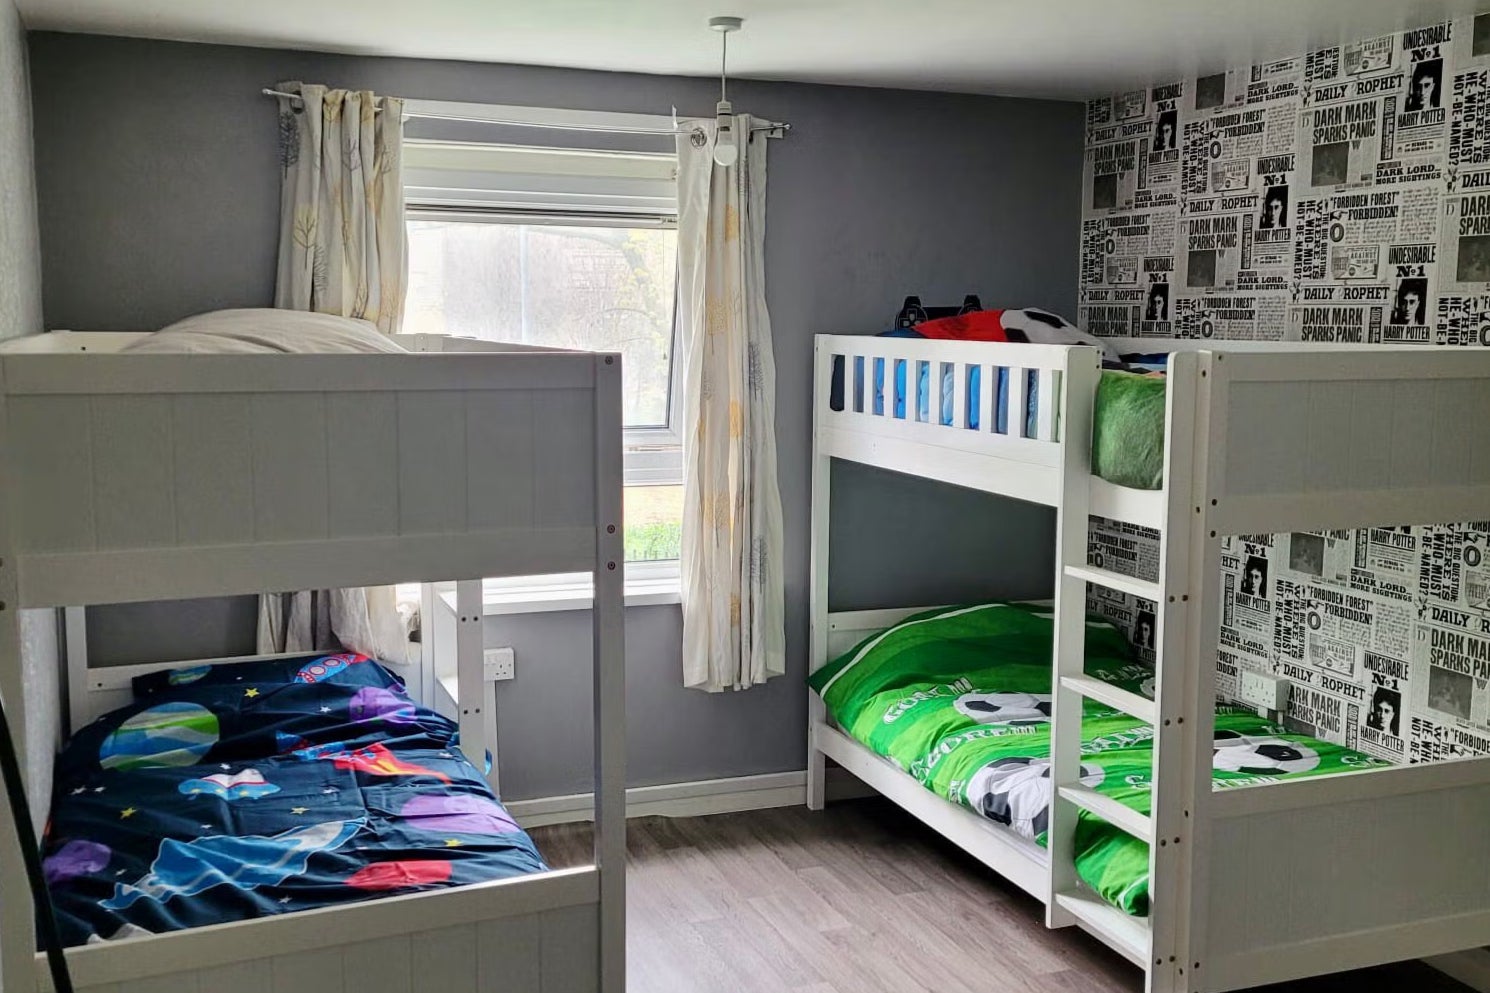 Zarach deliver bunk beds and single beds for children across north-west England